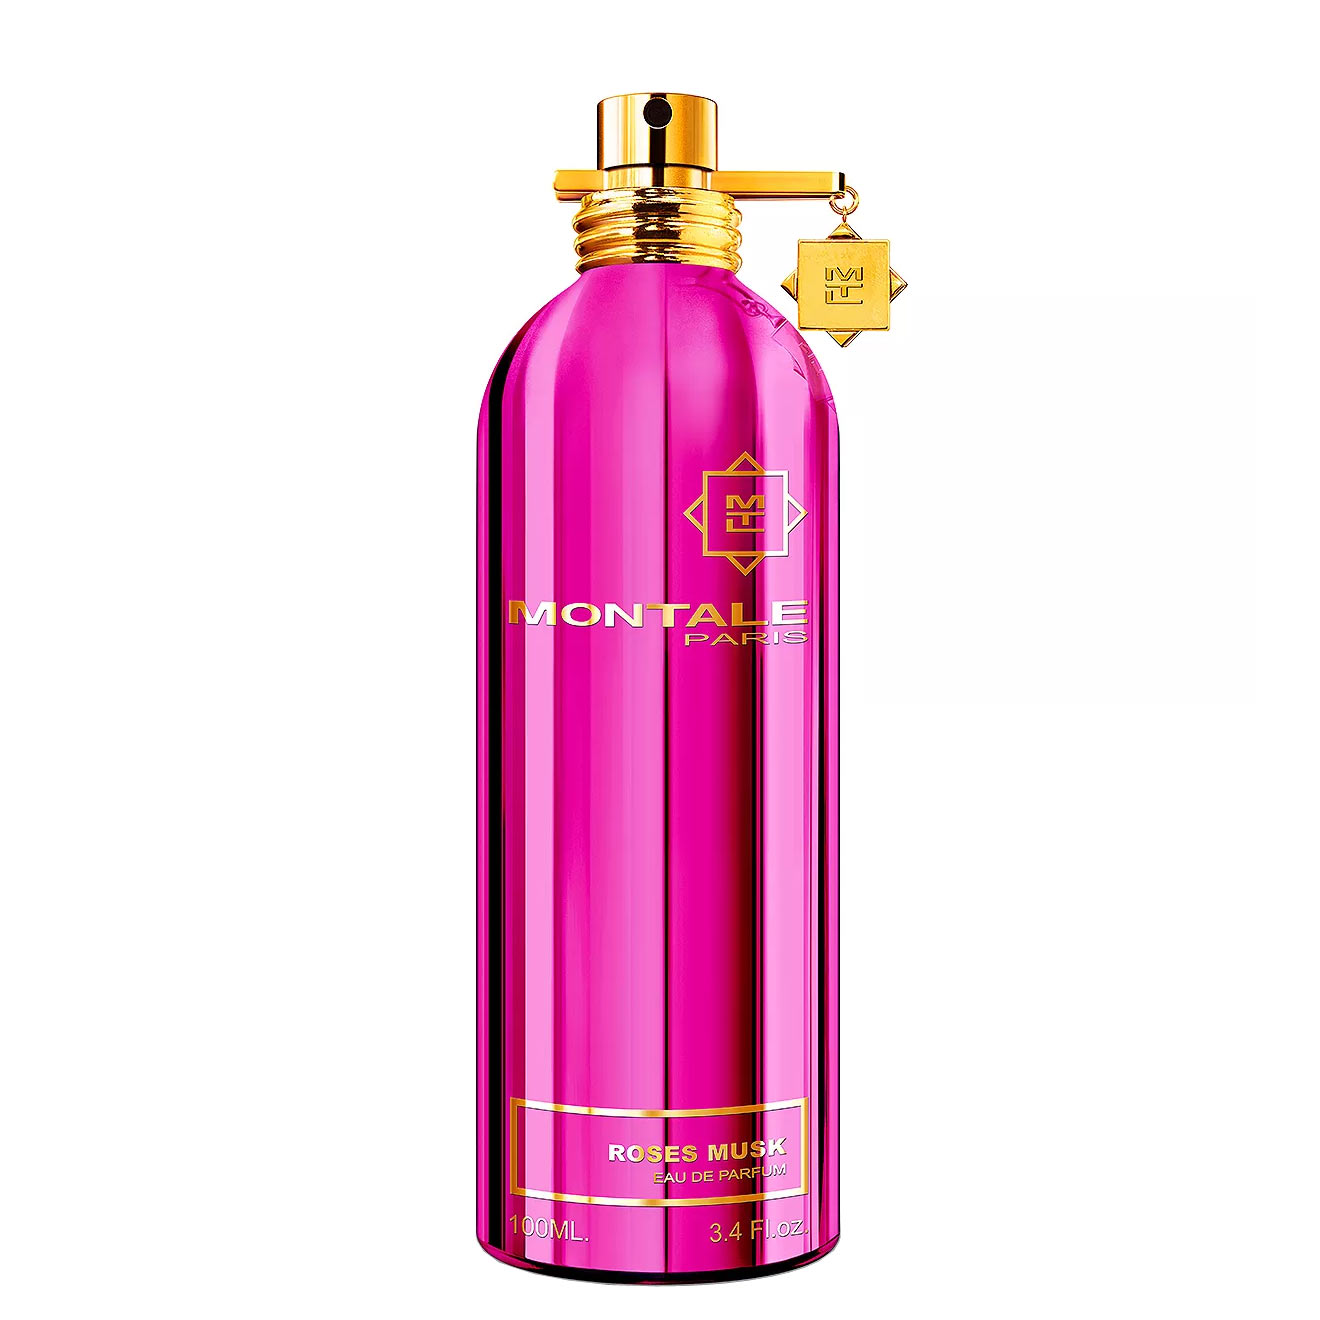 Roses-Musk-Montale